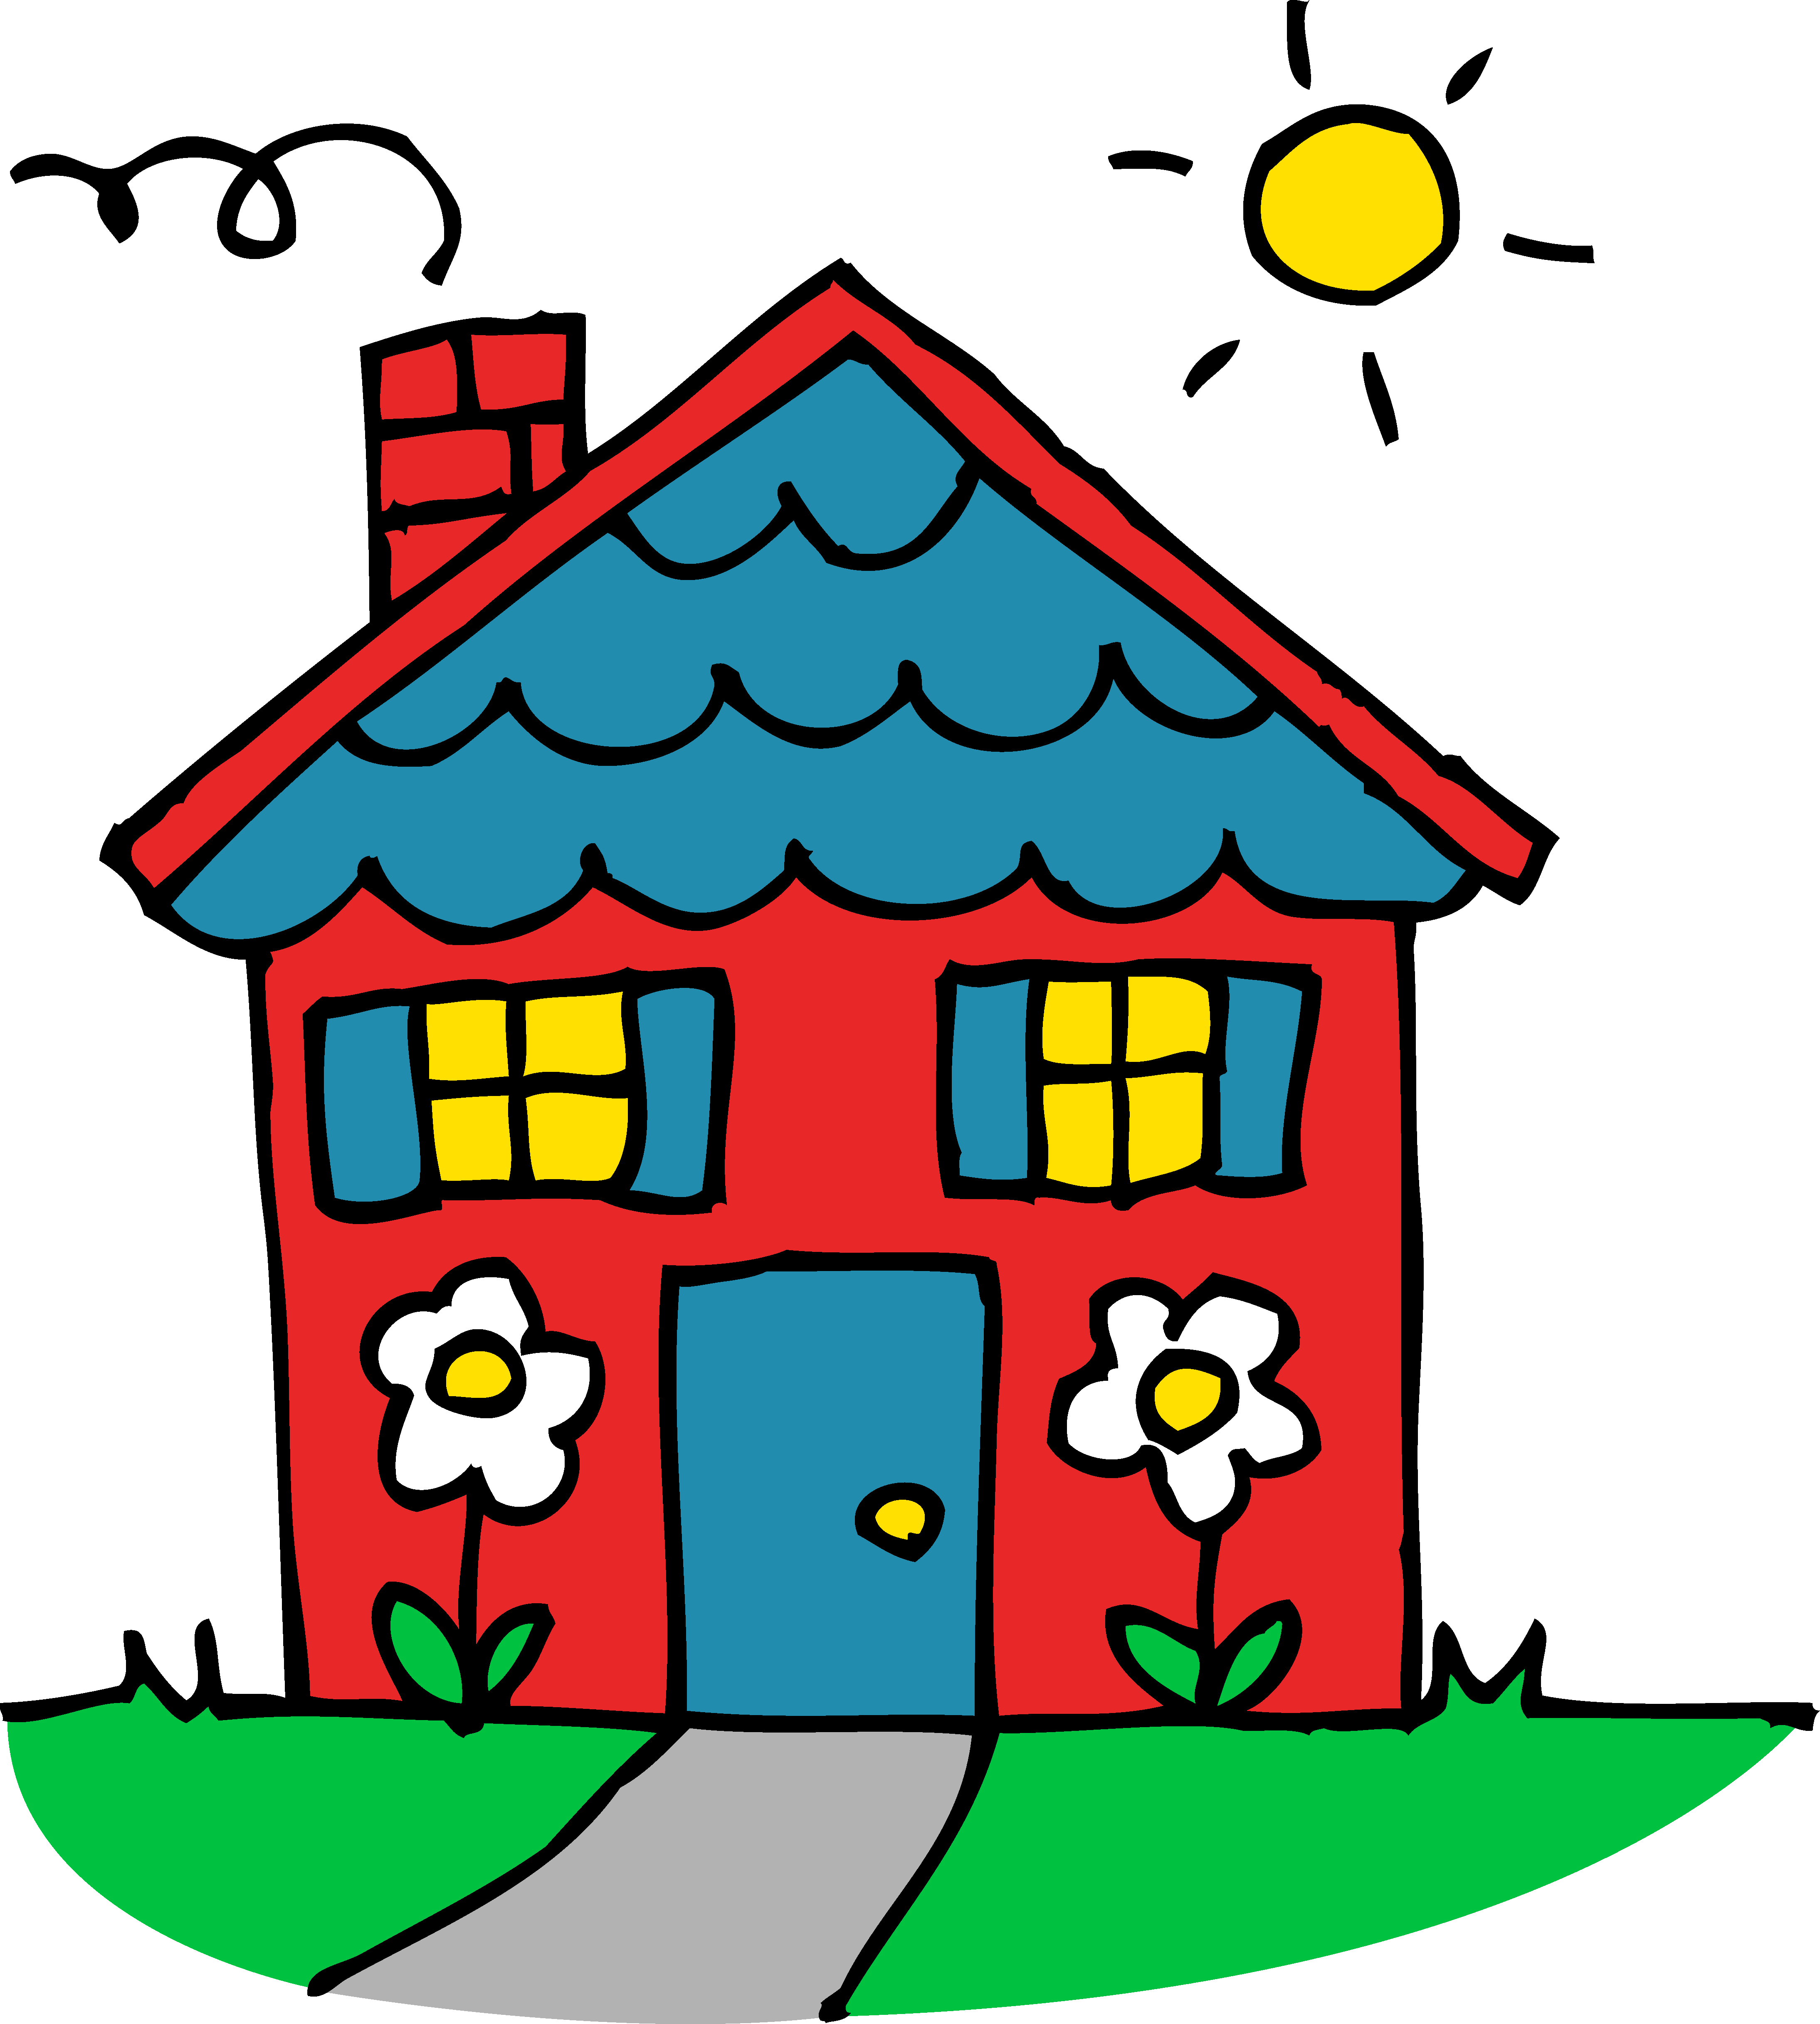 Charming little red free. Working clipart house